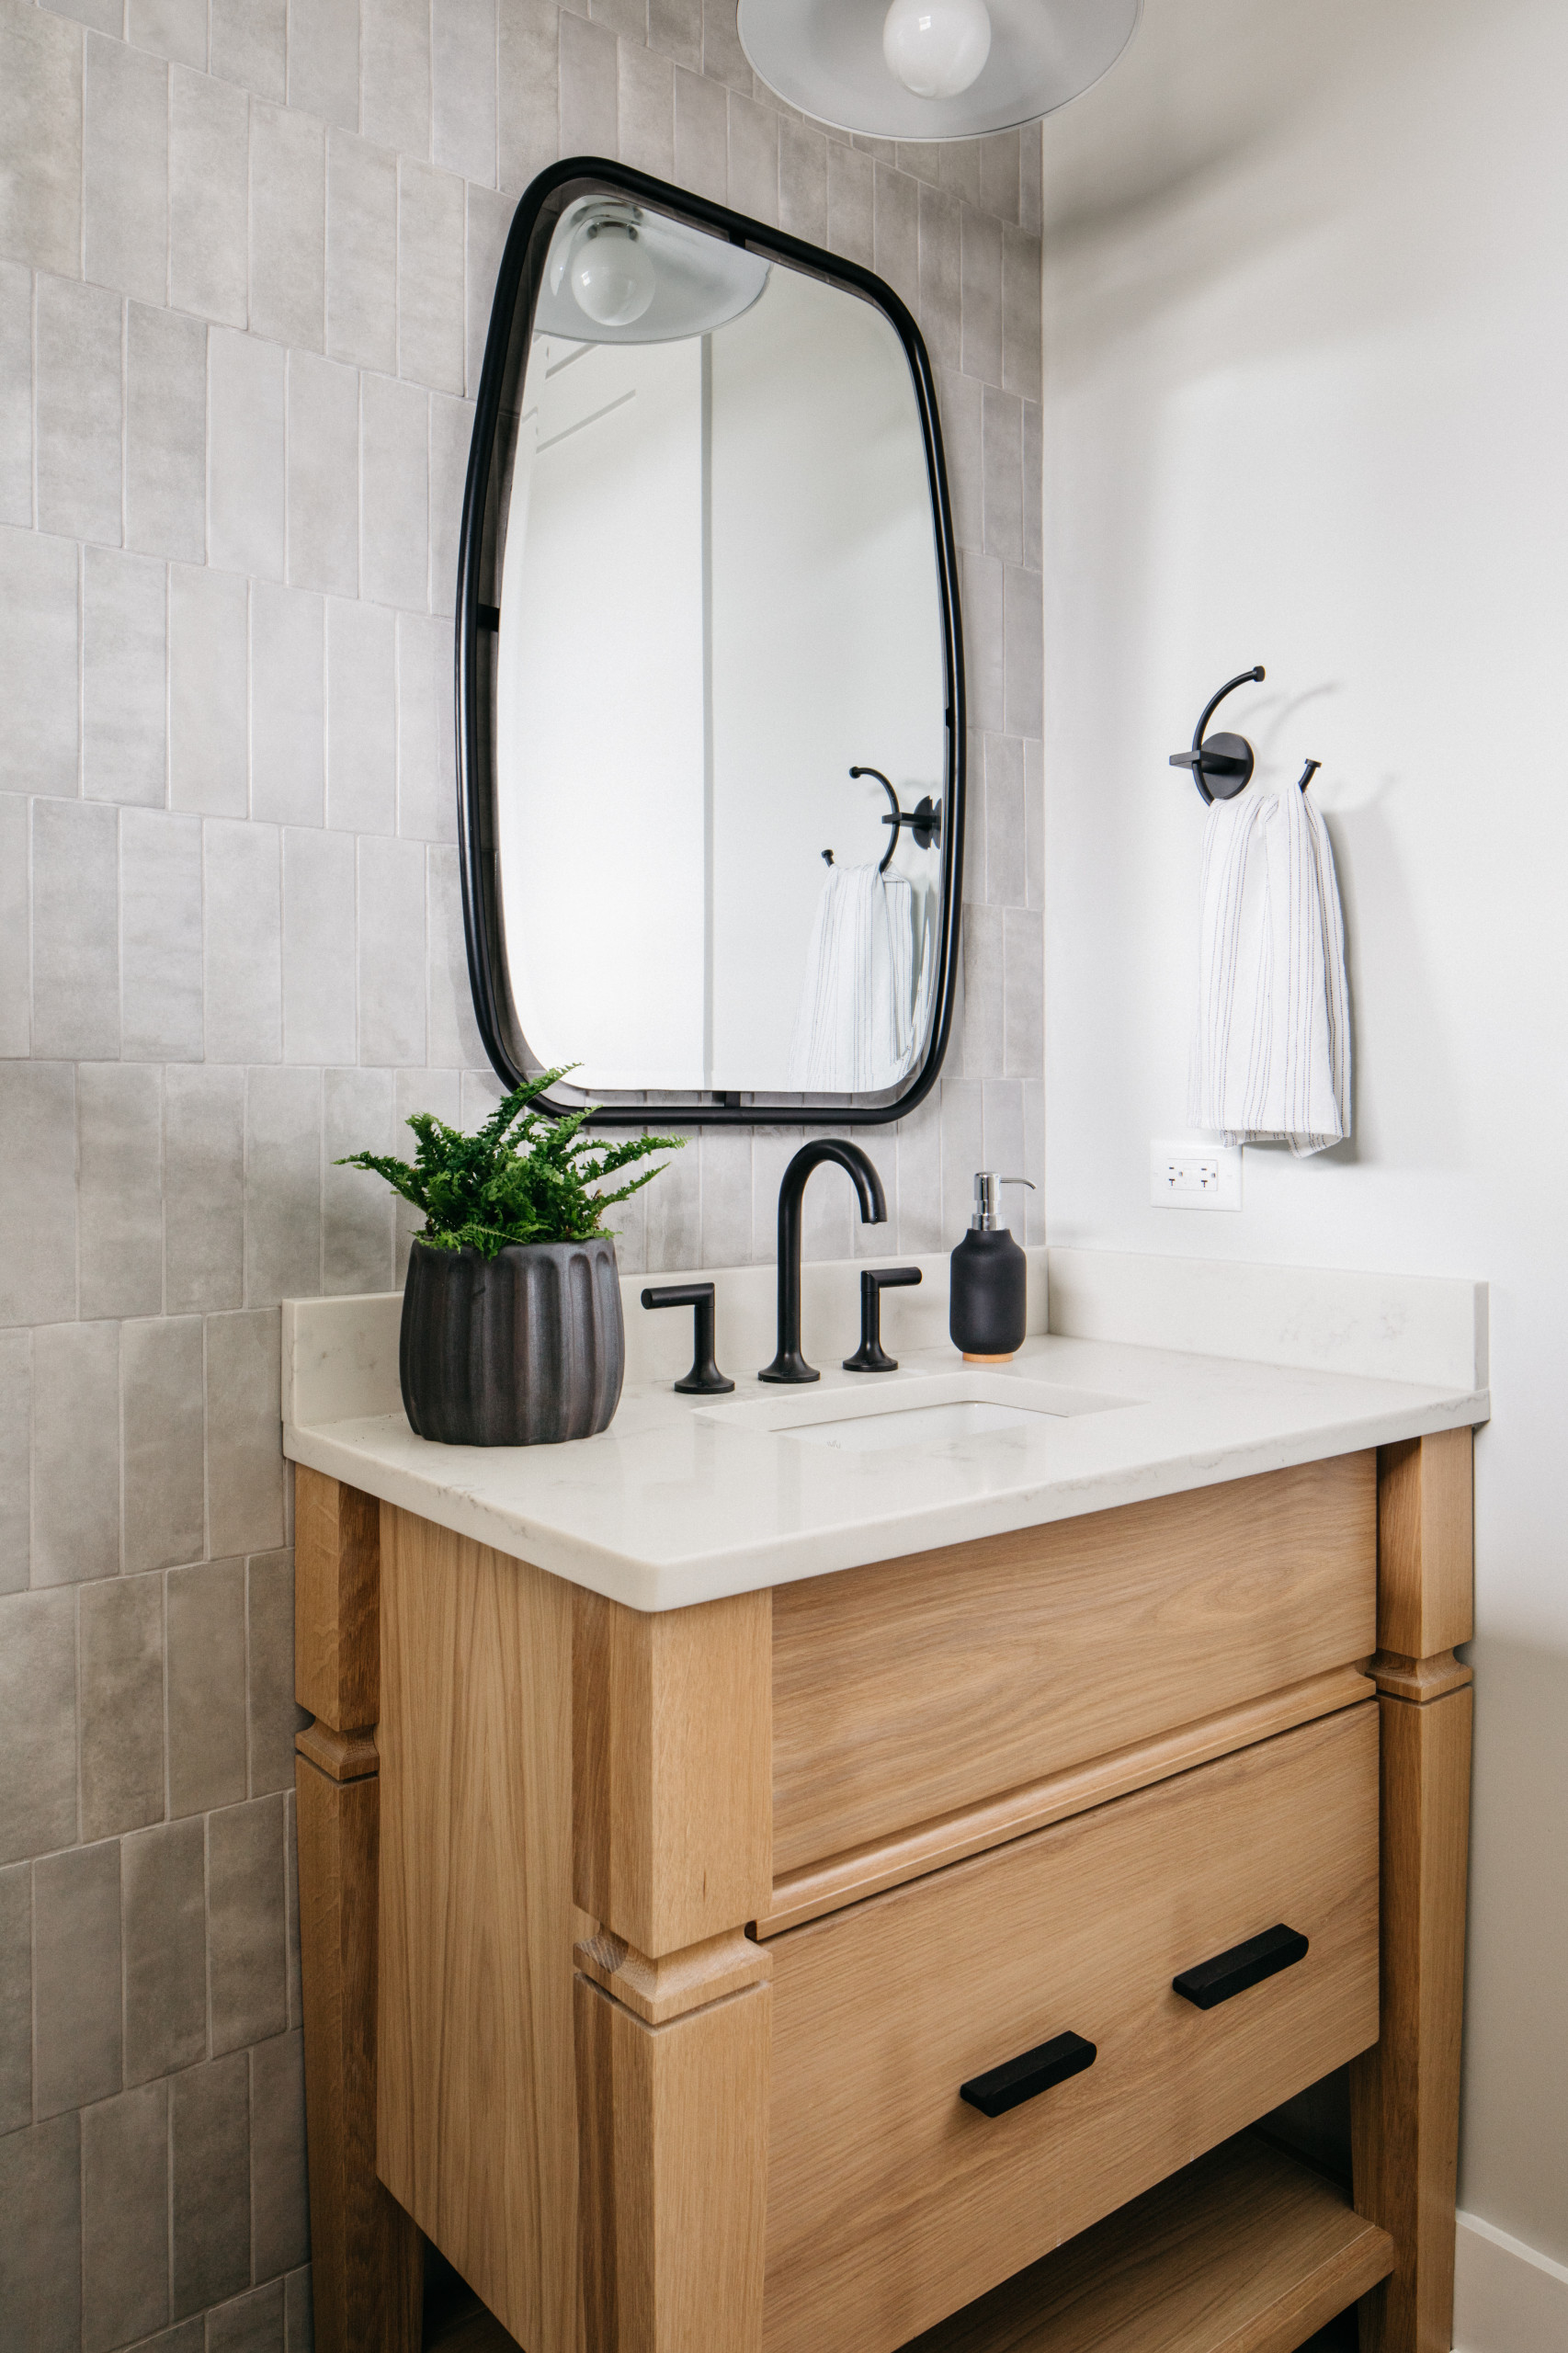 75 Beautiful Gray Tile Bathroom Pictures Ideas October 2020 Houzz,Coffee And Espresso Maker